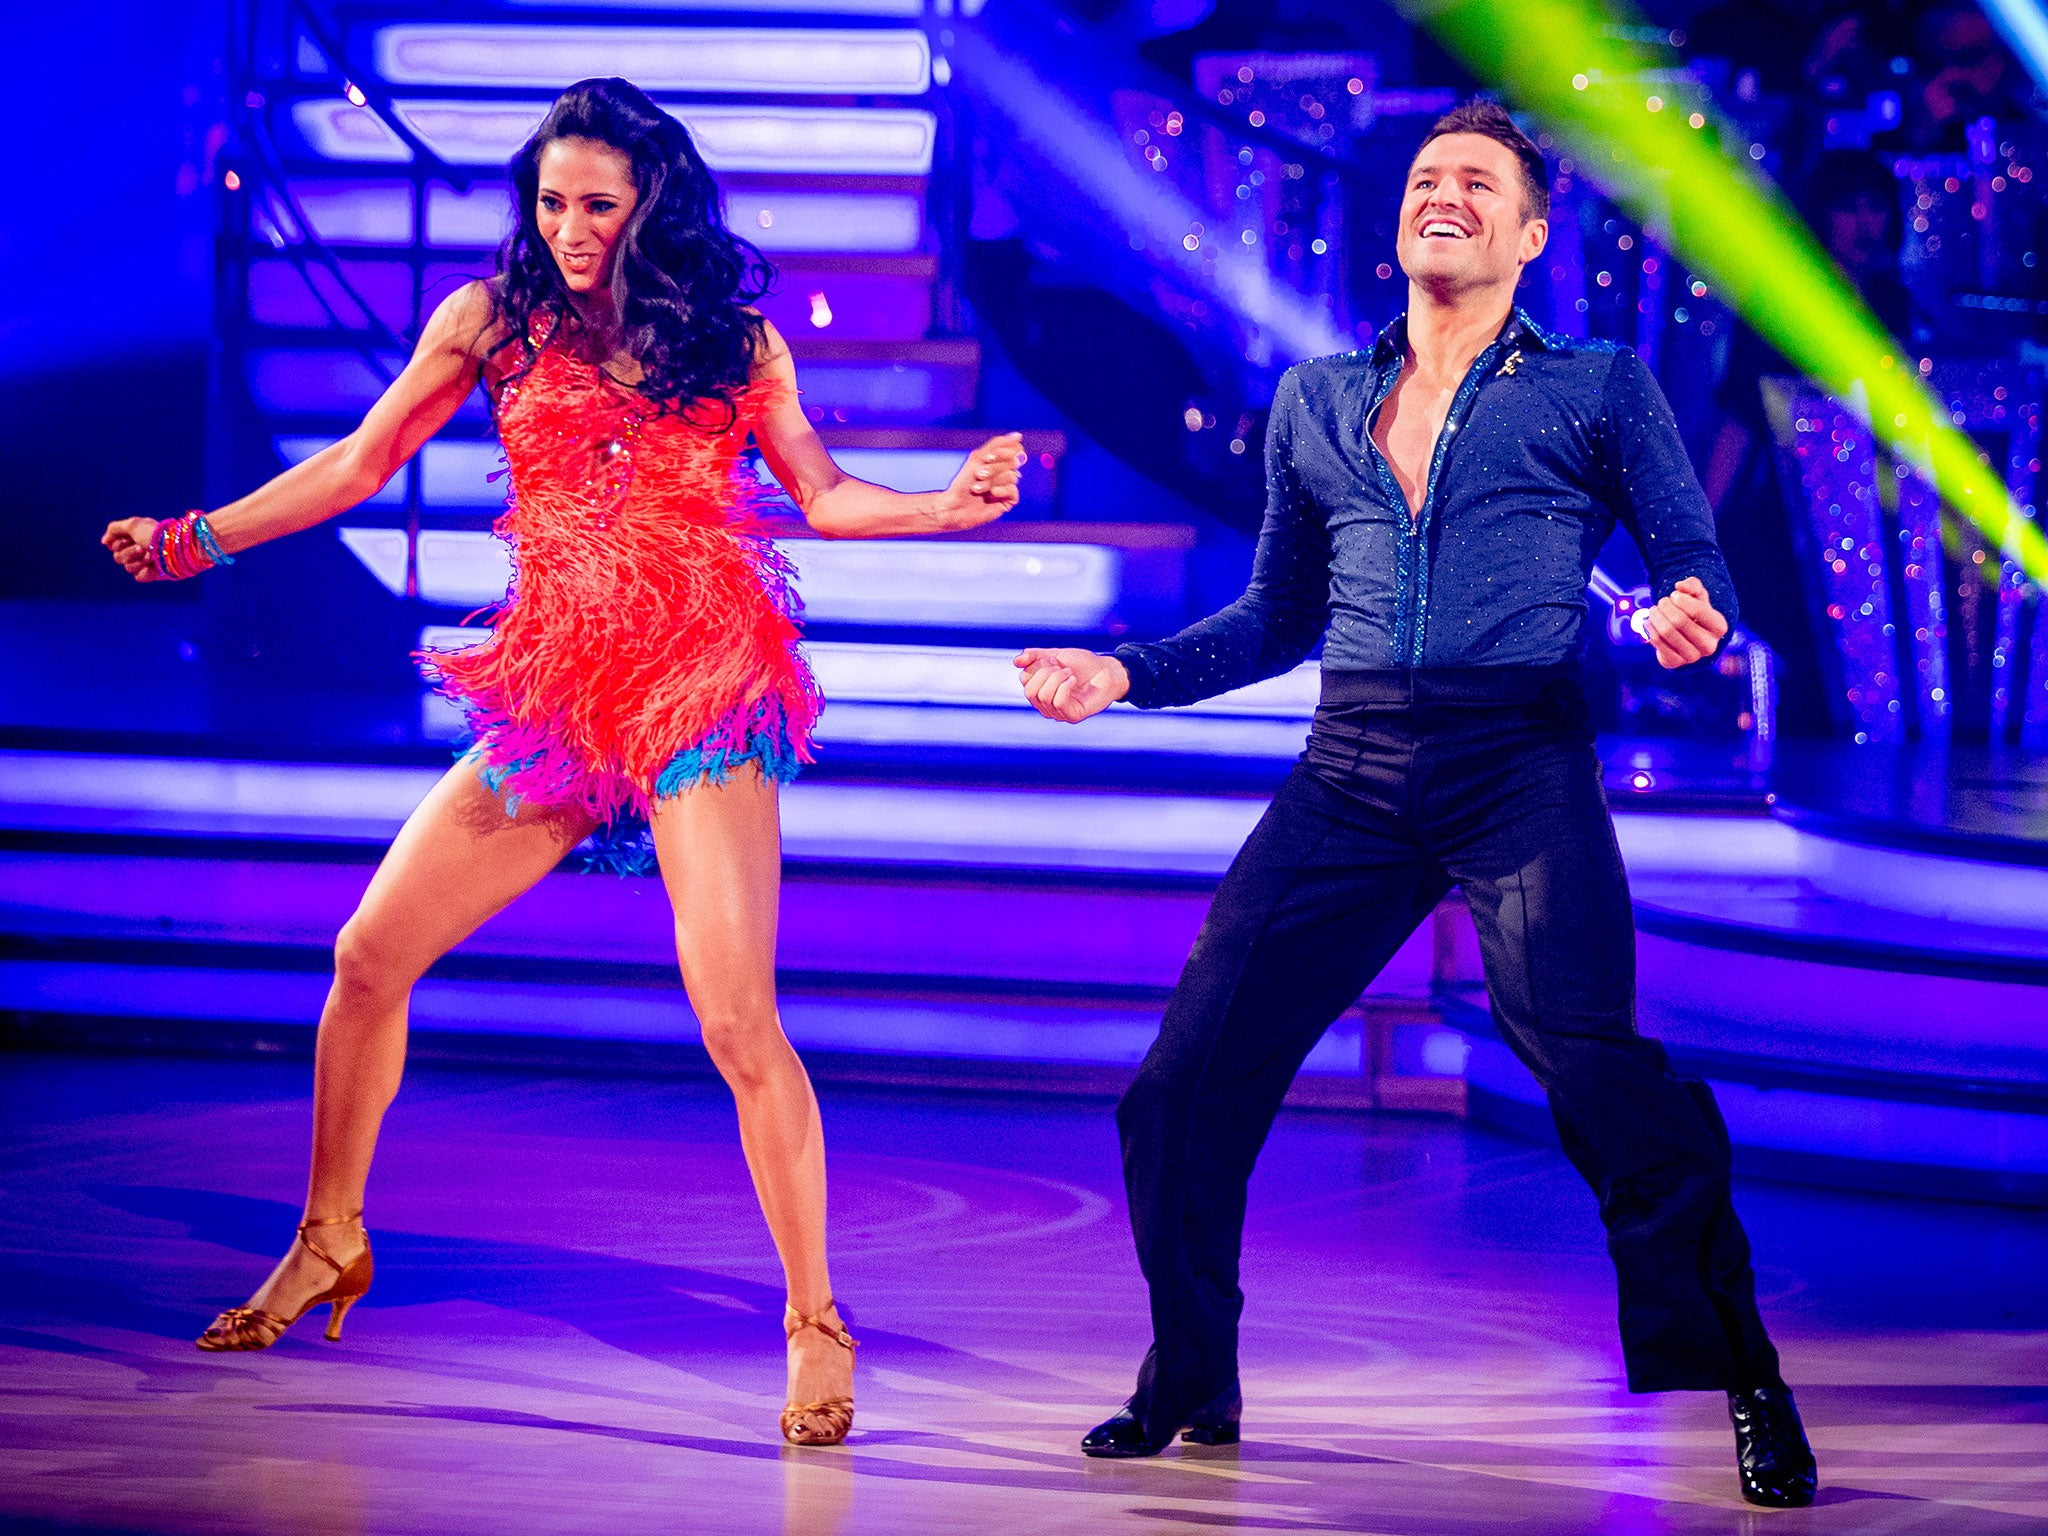 Karen Hauer and Mark Wright shake it on Strictly Come Dancing